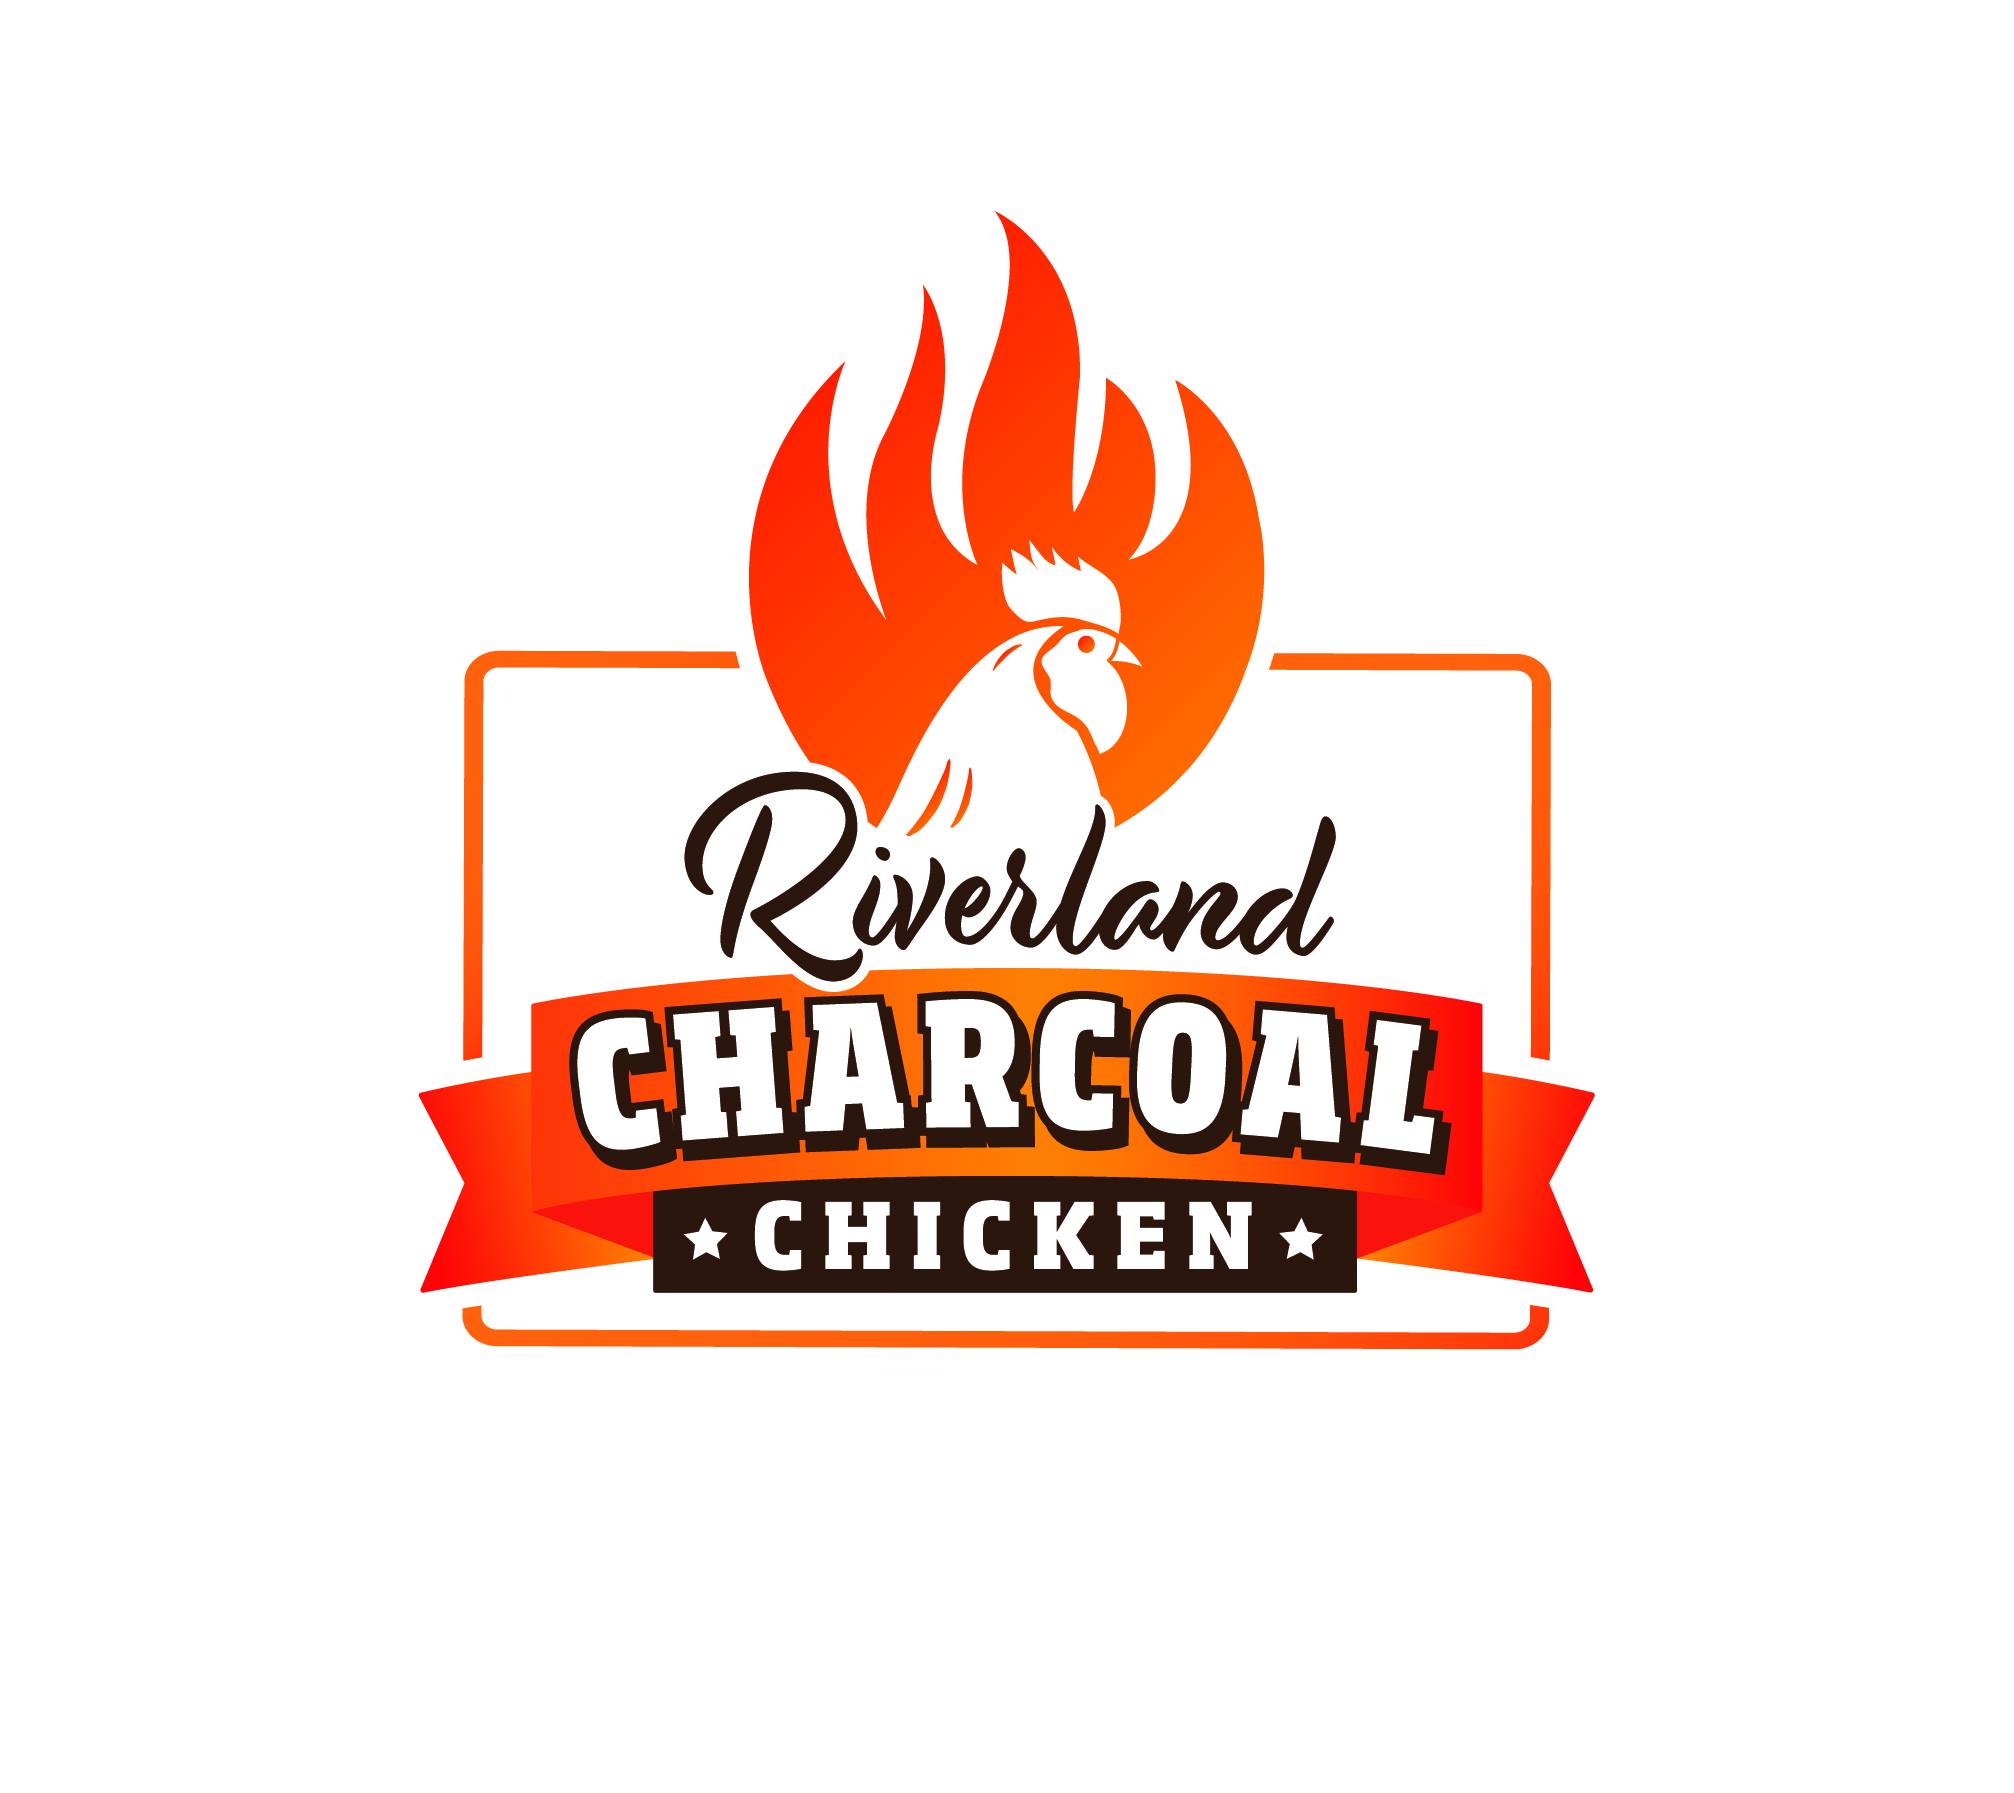 Riverland Charcoal Chicken